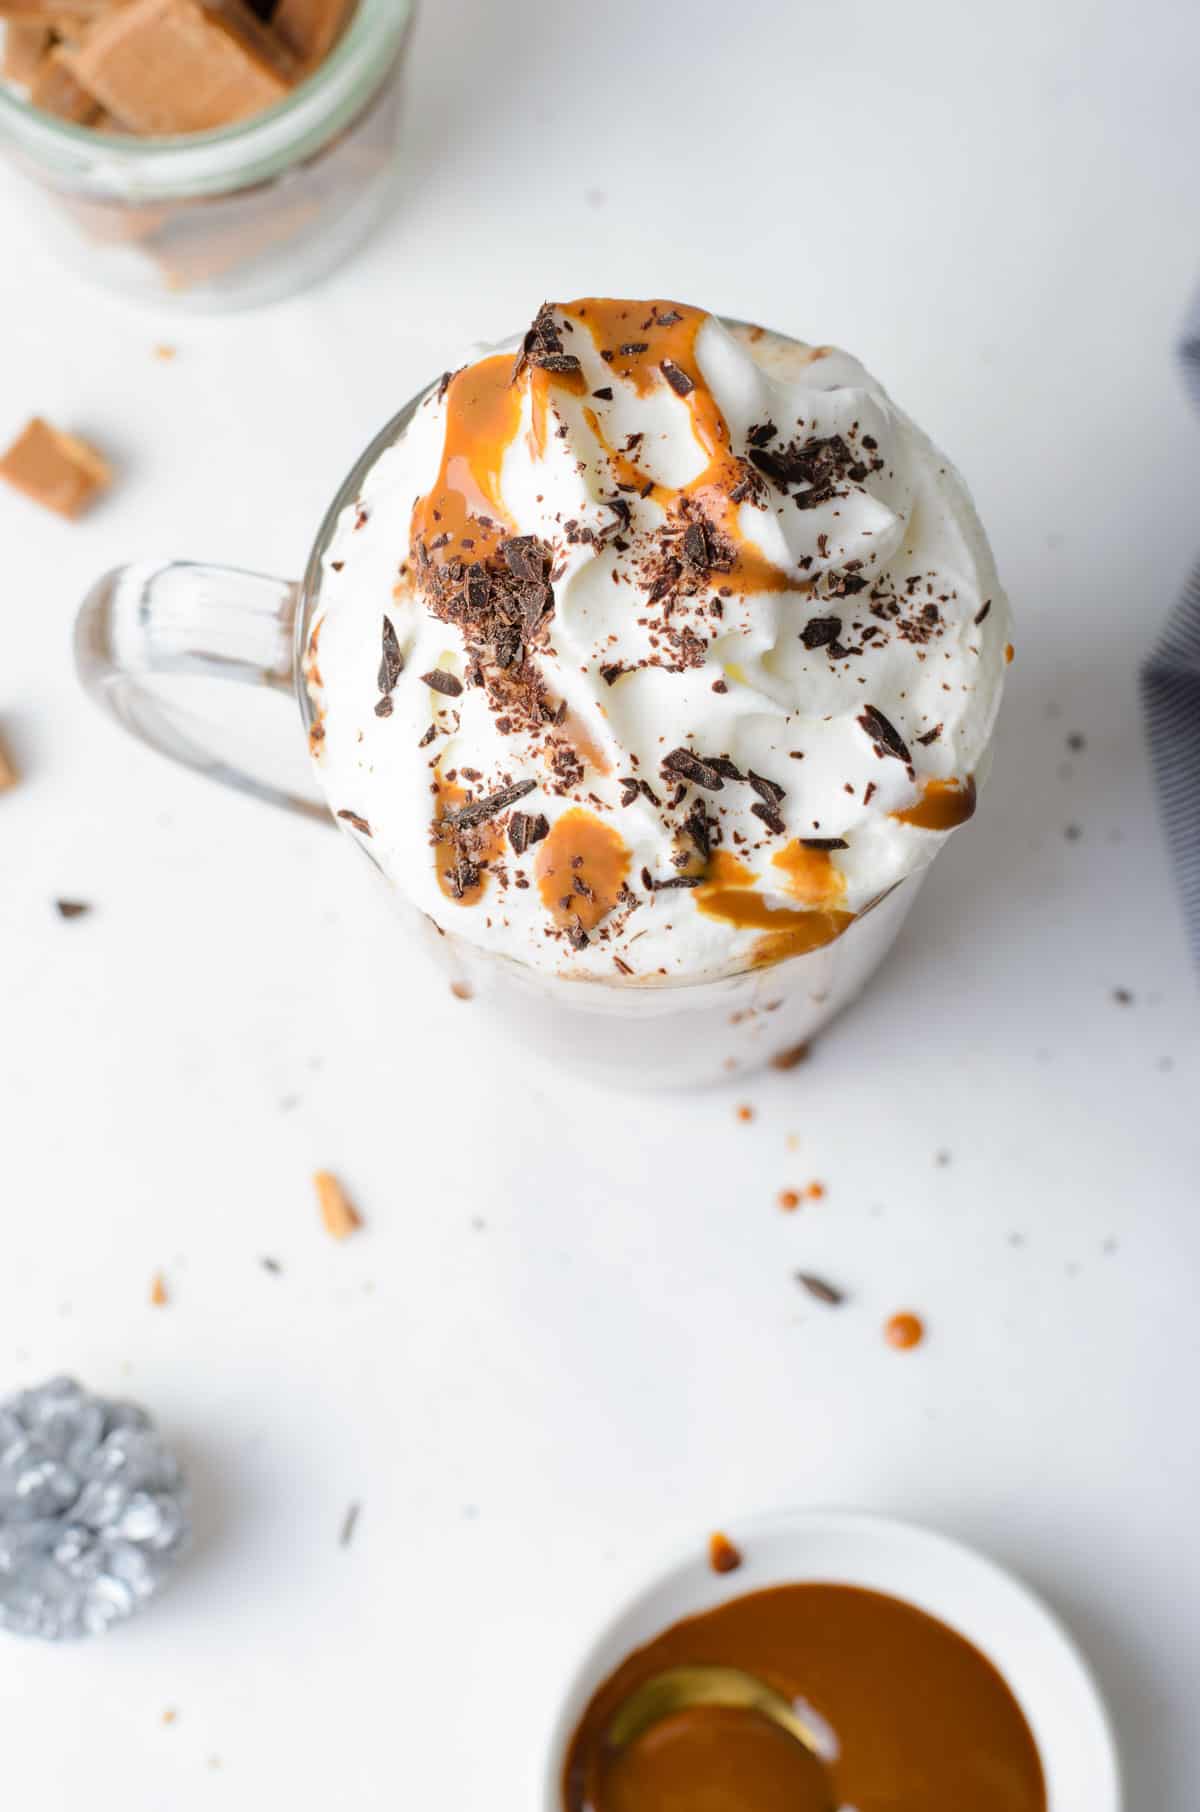 Overhead view of a mug of cocoa topped with whipped cream, caramel, and chocolate shavings.